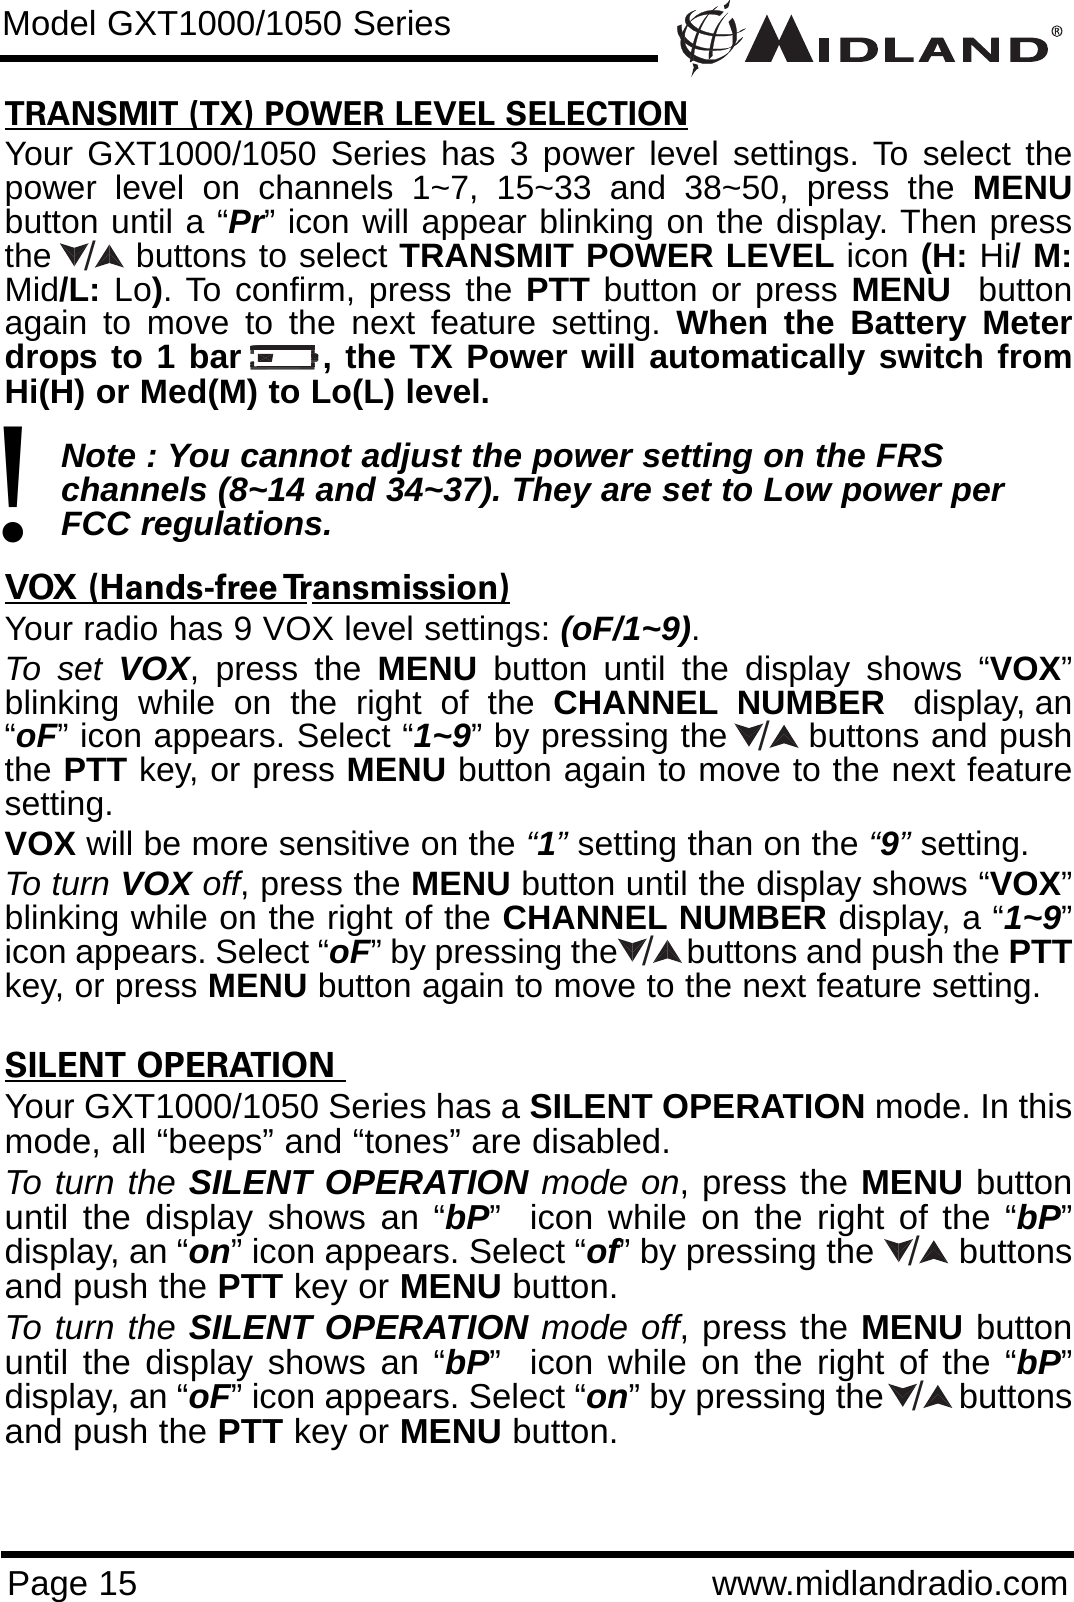 Page 15 www.midlandradio.comTRANSMIT (TX) POWER LEVEL SELECTIONYour GXT1000/1050 Series has 3 power level settings. To select thepower level on channels 1~7, 15~33 and 38~50, press the MENUbutton until a “Pr” icon will appear blinking on the display. Then pressthe       buttons to select TRANSMIT POWER LEVEL icon (H: Hi/ M:Mid/L: Lo). To confirm, press the PTT button or press MENU buttonagain to move to the next feature setting. When the Battery Meterdrops to 1 bar      , the TX Power will automatically switch fromHi(H) or Med(M) to Lo(L) level.Note : You cannot adjust the power setting on the FRS   channels (8~14 and 34~37). They are set to Low power per FCC regulations.VOX (Hands-free Transmission)Your radio has 9 VOX level settings: (oF/1~9).To set VOX, press the MENU button until the display shows “VOX”blinking  while  on  the  right  of  the  CHANNEL NUMBER display, an“oF” icon appears. Select “1~9” by pressing the       buttons and pushthe PTT key, or press MENU button again to move to the next featuresetting.  VOX will be more sensitive on the “1”setting than on the “9”setting.To turn VOX off, press the MENU button until the display shows “VOX”blinking while on the right of the CHANNEL NUMBER display, a “1~9”icon appears. Select “oF” by pressing the        buttons and push the PTTkey, or press MENU button again to move to the next feature setting.SILENT OPERATION Your GXT1000/1050 Series has a SILENT OPERATION mode. In thismode, all “beeps” and “tones” are disabled. To turn the SILENT OPERATION mode on, press the MENU buttonuntil the display shows an “bP”  icon while on the right of the “bP”display, an “on” icon appears. Select “of” by pressing the         buttonsand push the PTT key or MENU button. To turn the SILENT OPERATION mode off, press the MENU buttonuntil the display shows an “bP”  icon while on the right of the “bP”display, an “oF” icon appears. Select “on” by pressing the        buttonsand push the PTT key or MENU button.Model GXT1000/1050 Series!/////